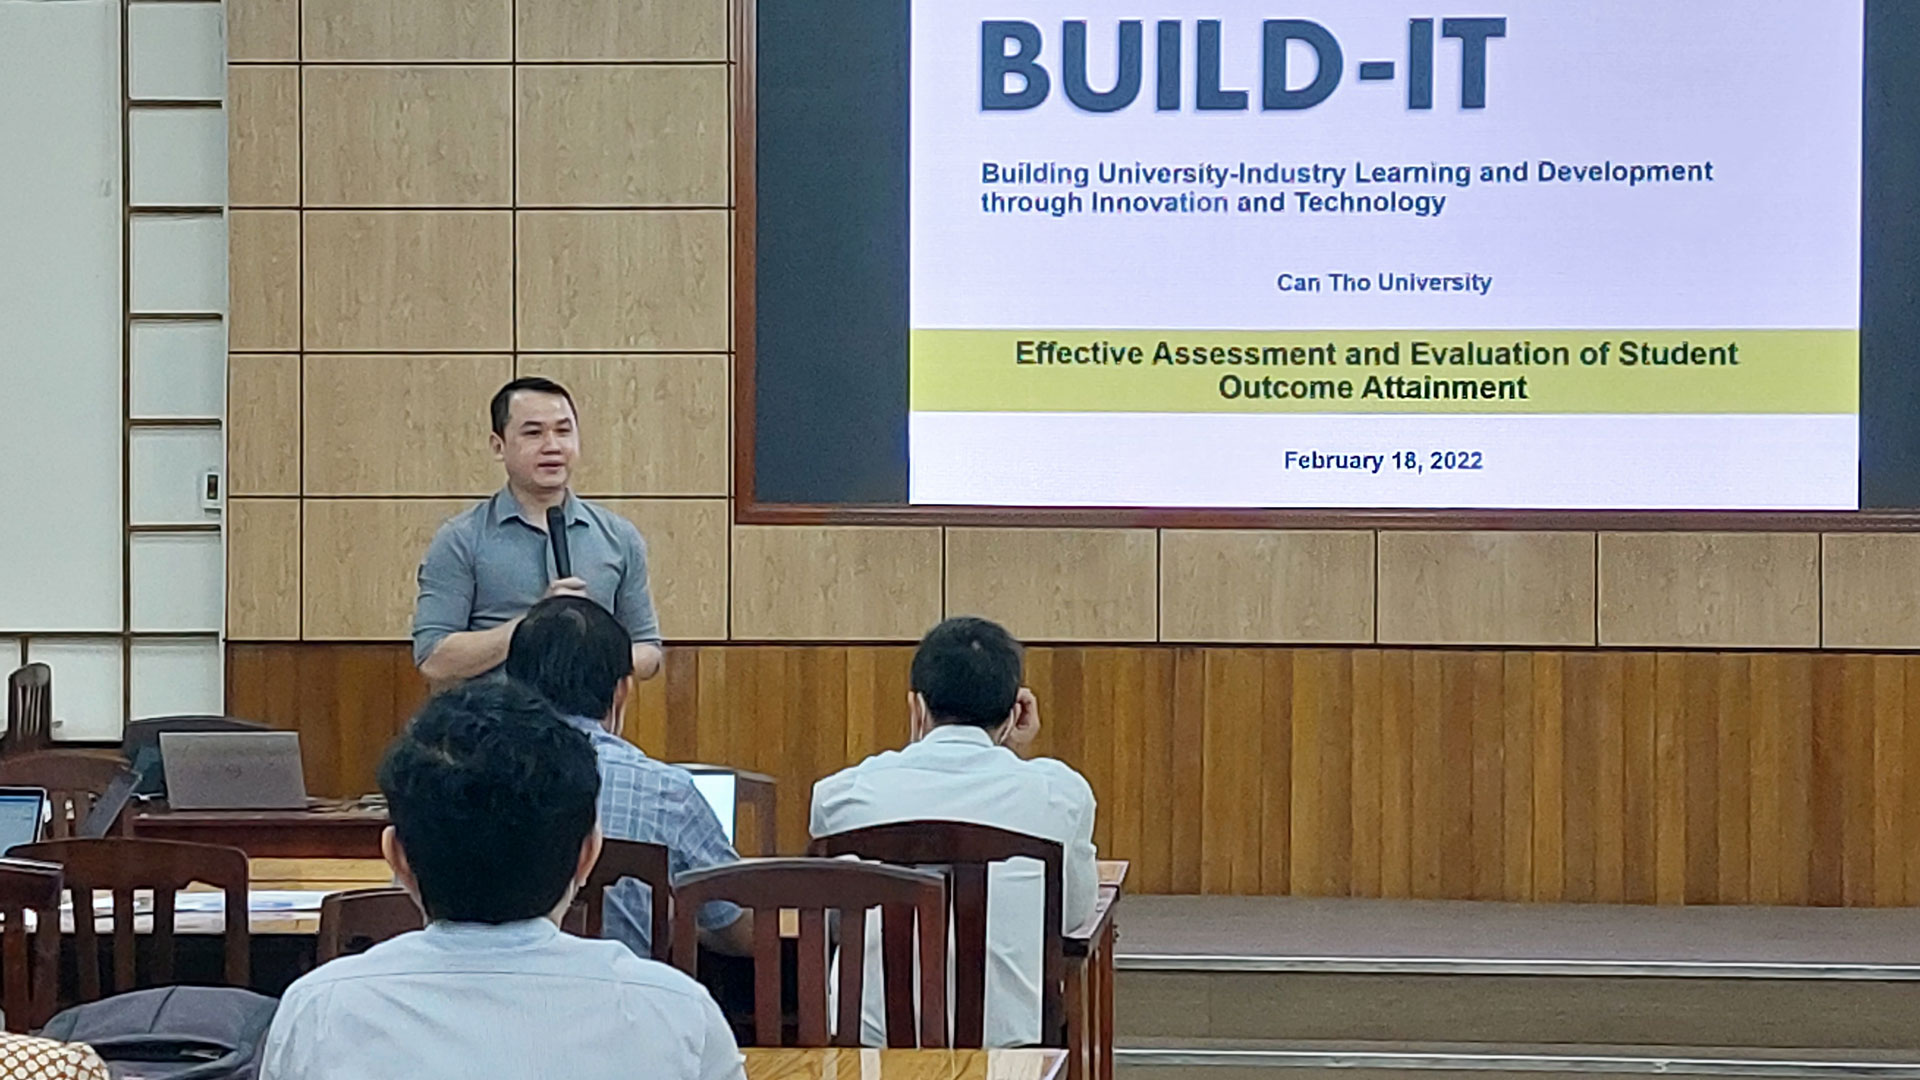 Thai Tran, a program manager for accreditation and quality assurance, presents a workshop on ABET accreditation topics at Can Tho University in Vietnam.